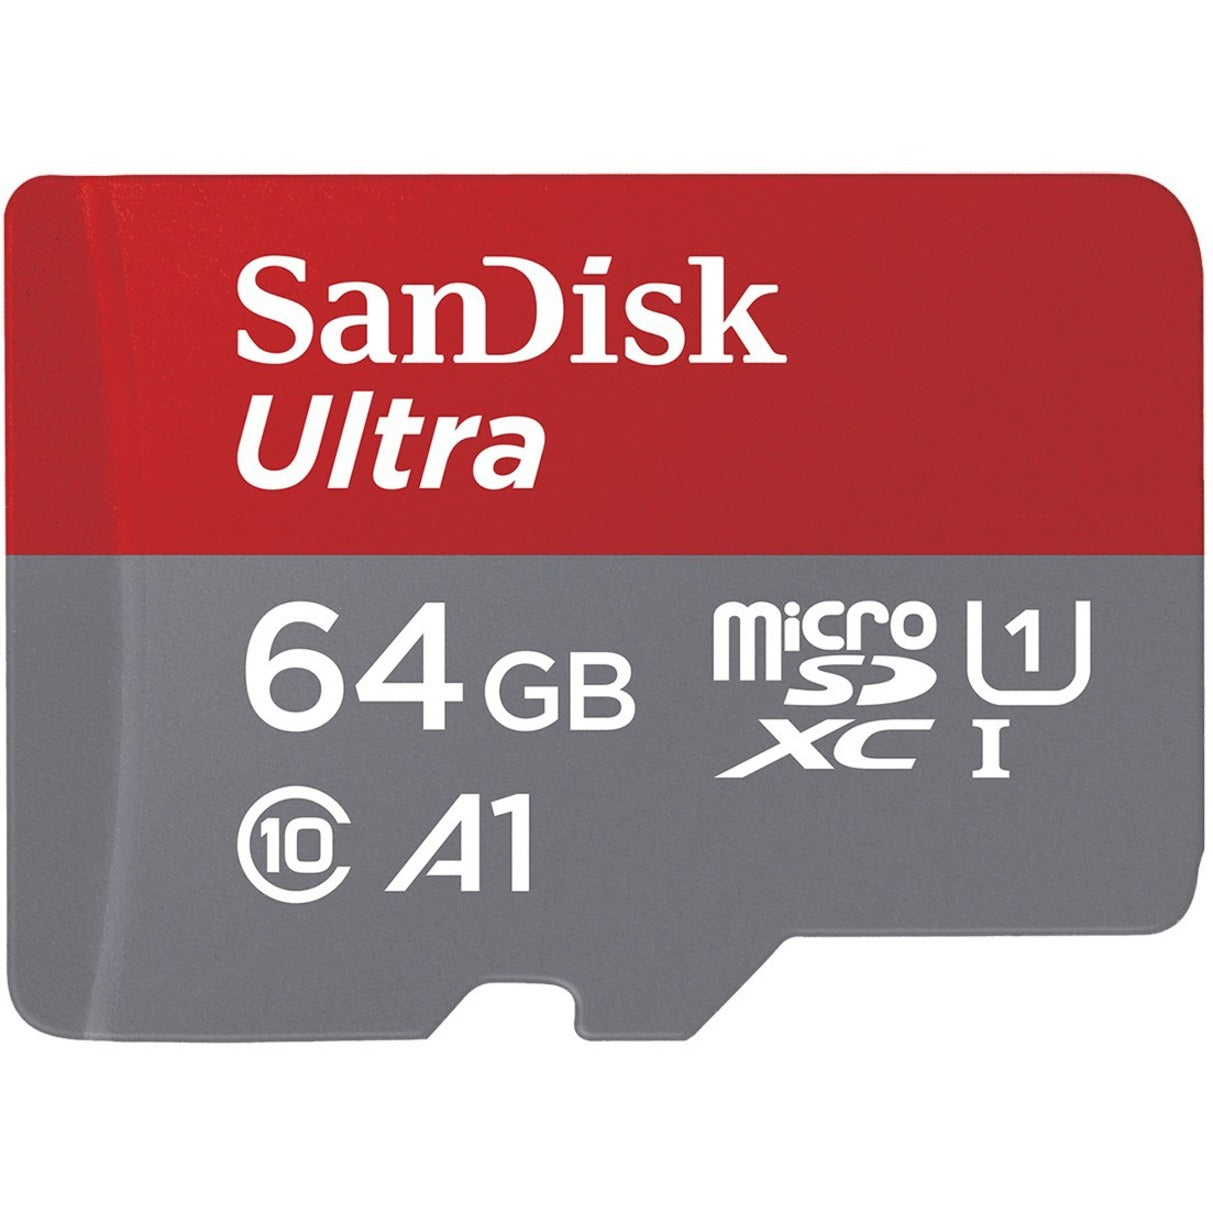 SanDisk SDSQUA4-064G-GN6FA Ultra microSDXC UHS-I Card with Adapter - 64GB, 10 Year Warranty, 120 MB/s Maximum Read Speed